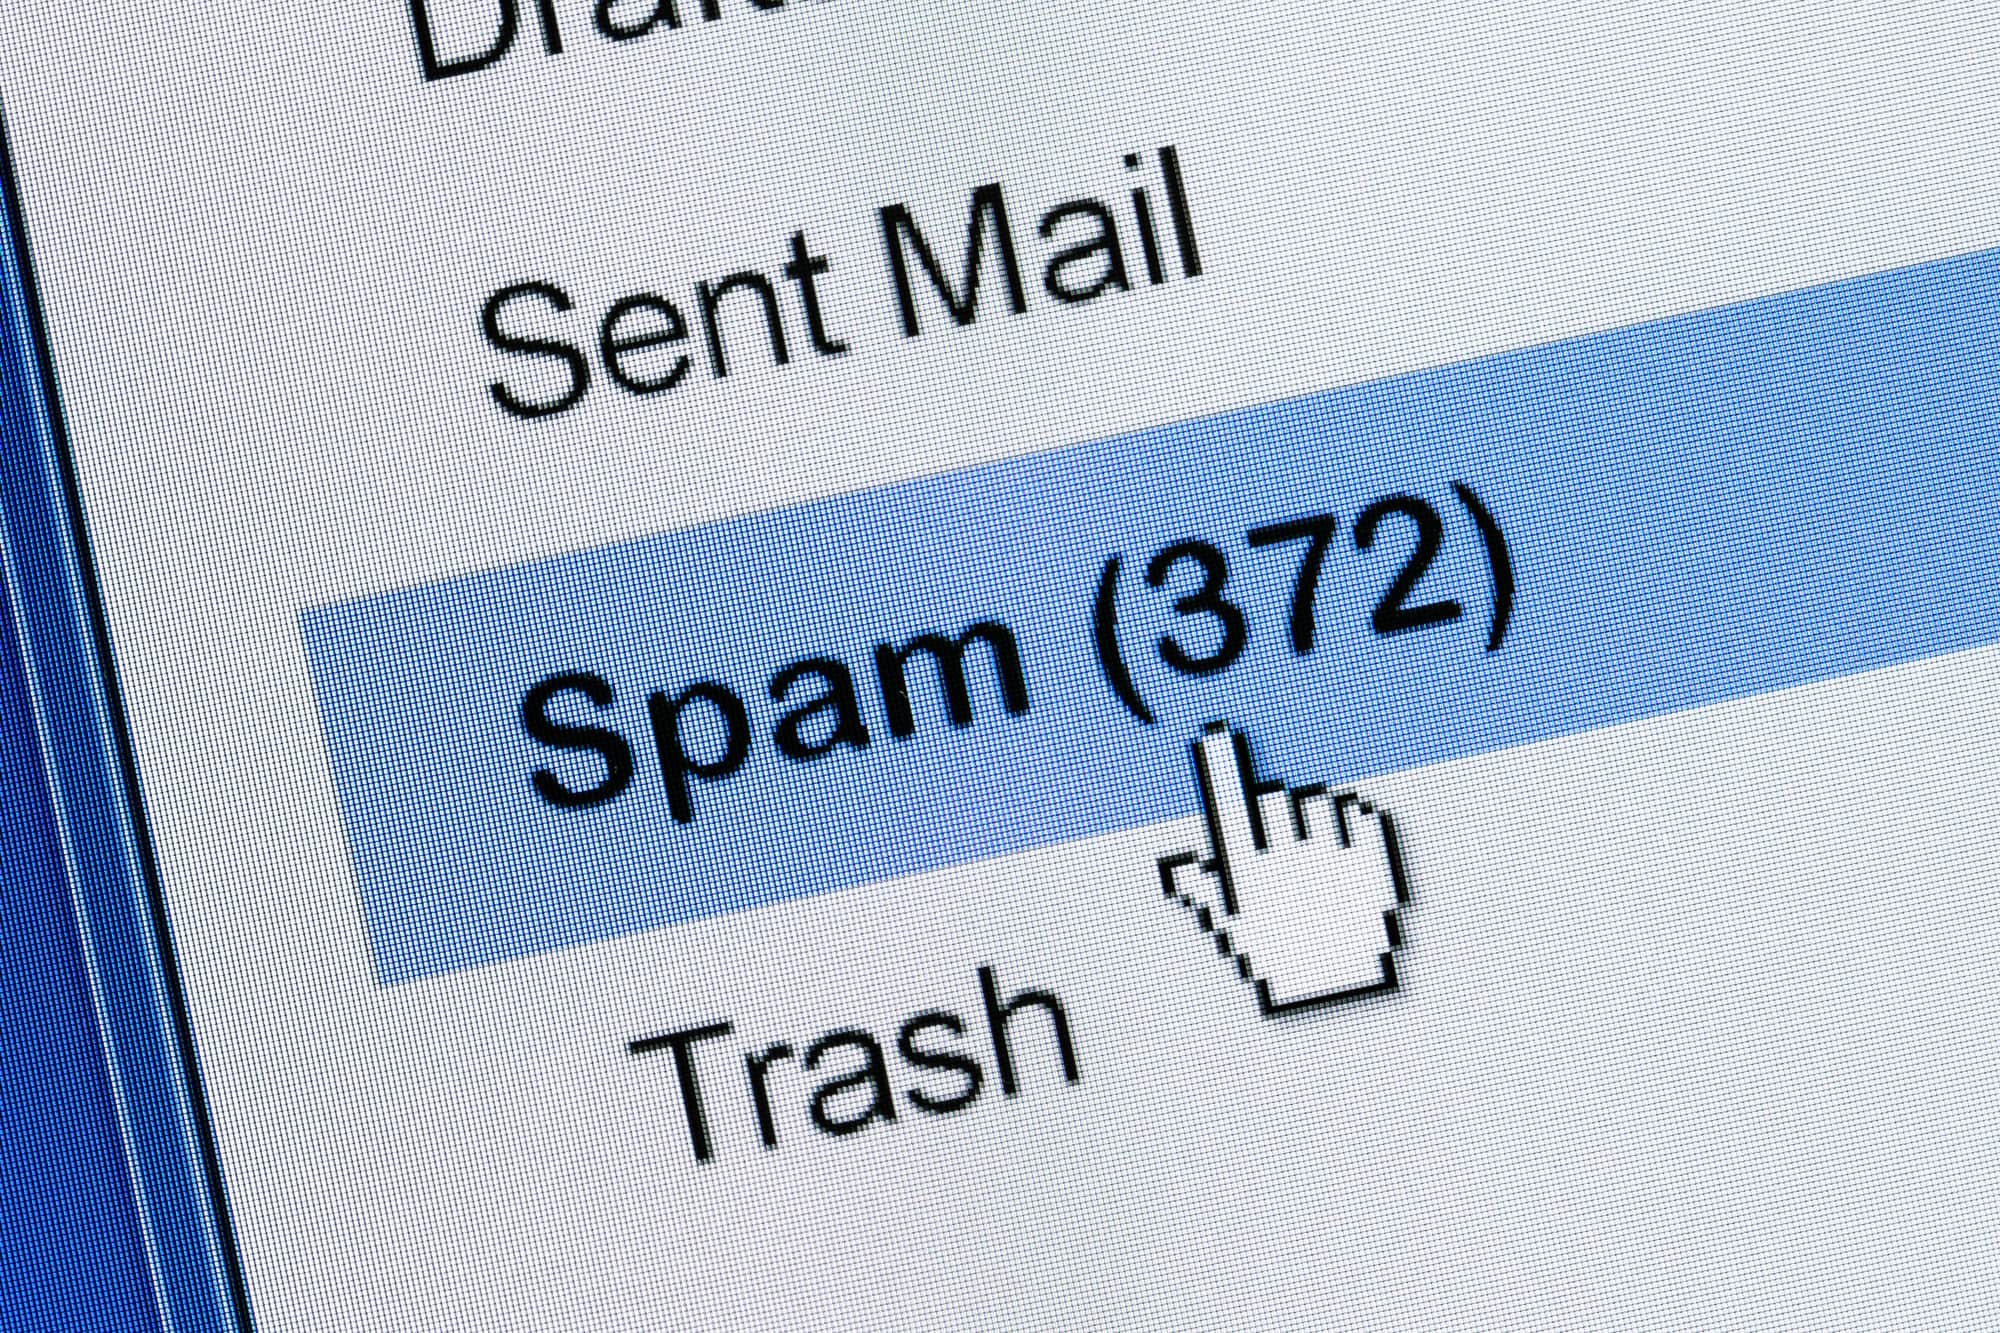 Spamming 101: Types of Spam, Ways to Identify, and Tips to Prevent Them